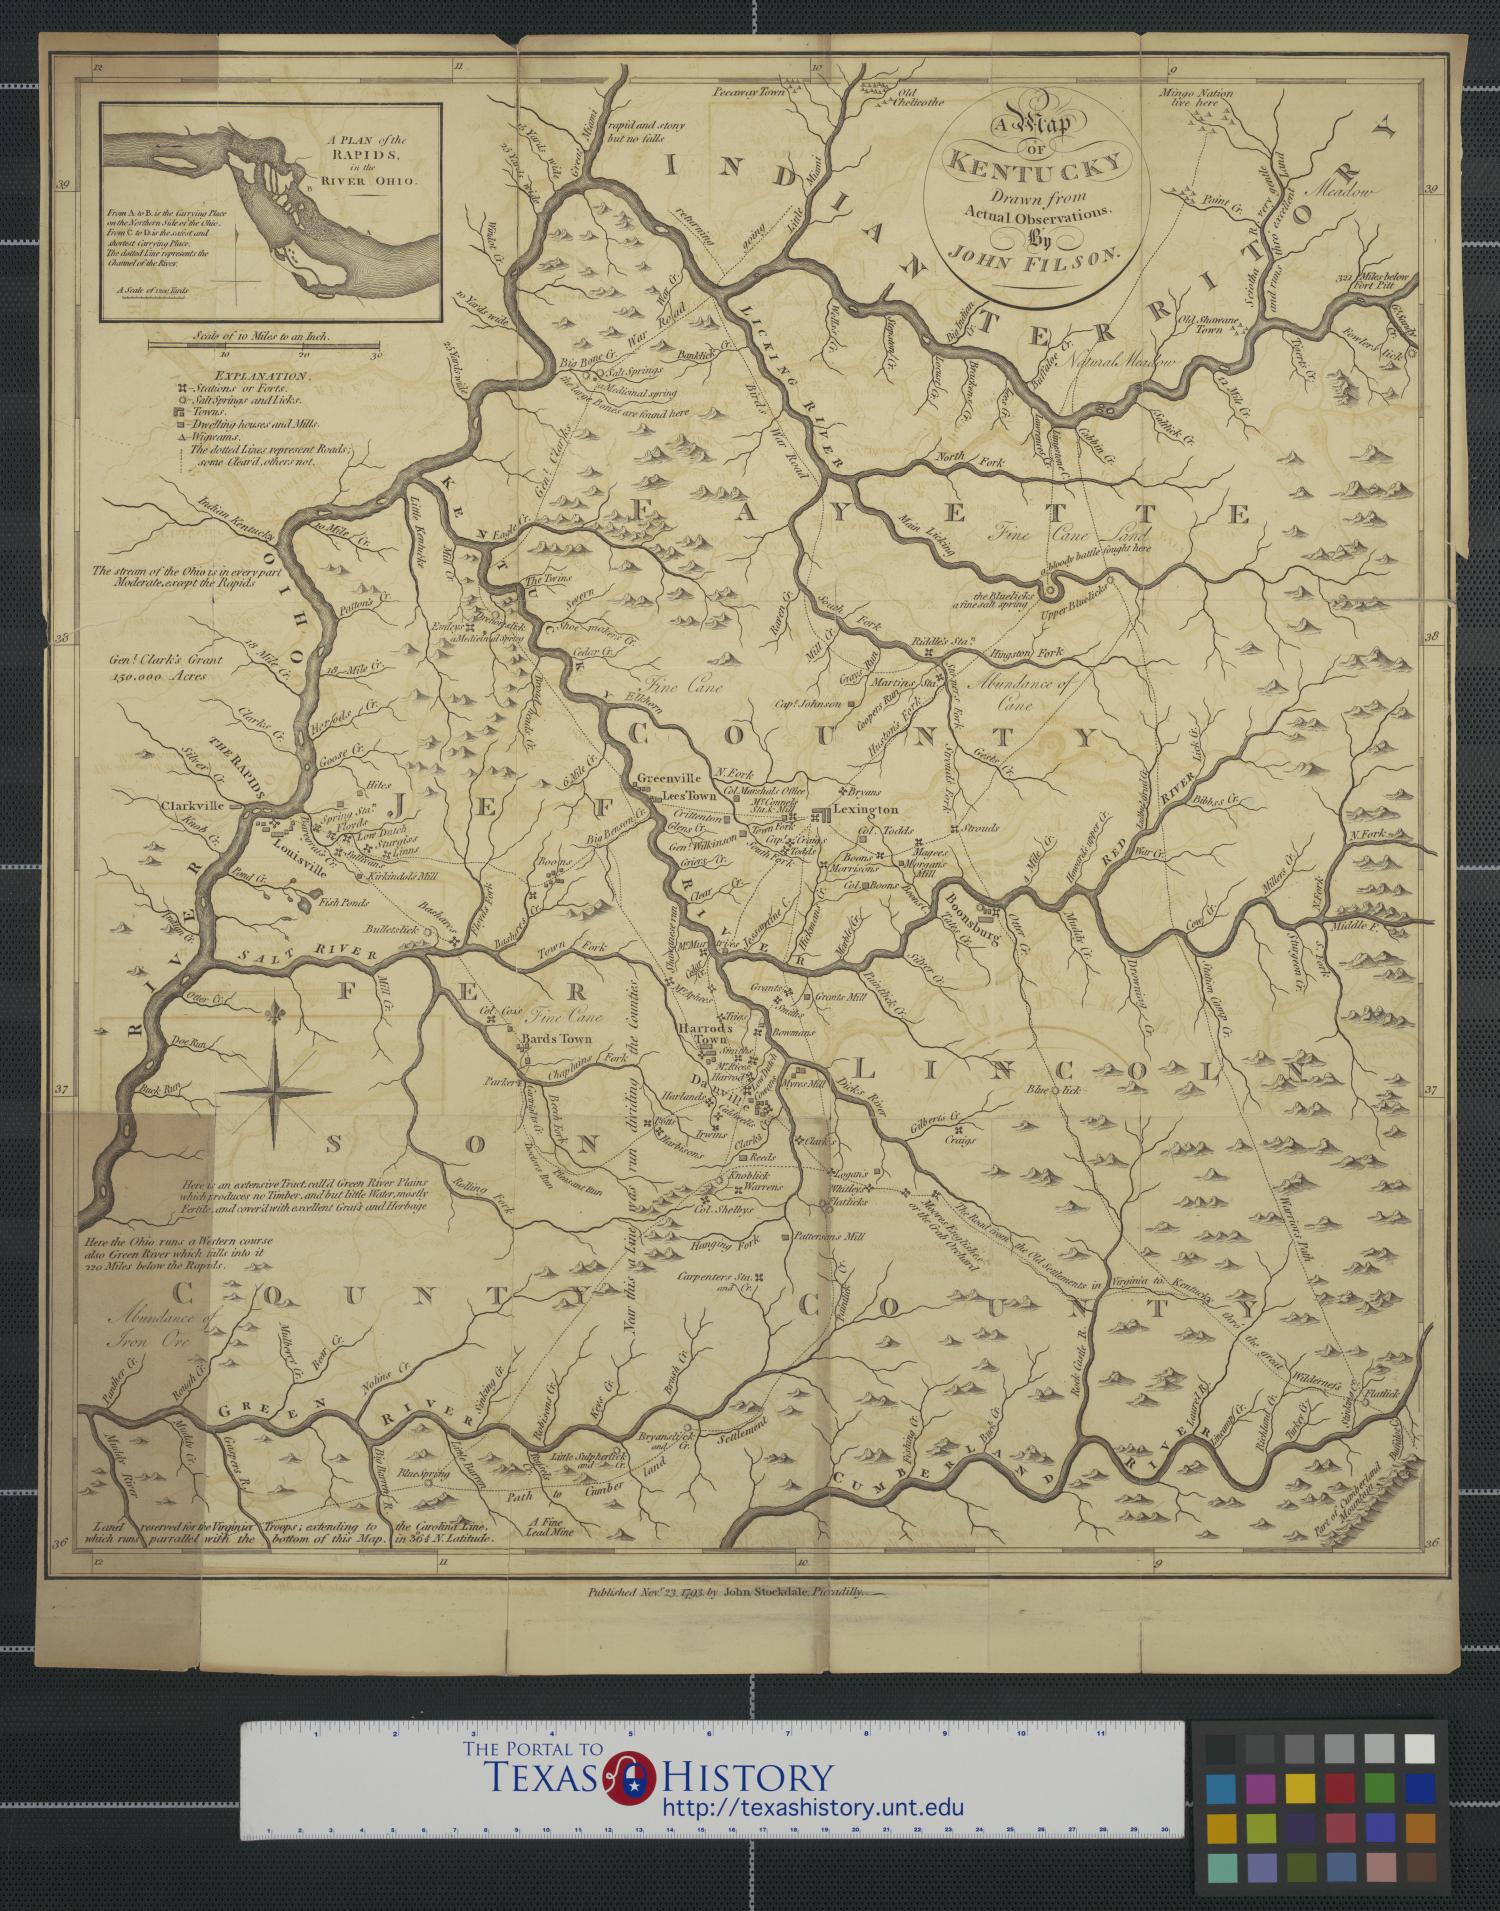 A [1793] map of Kentucky drawn from actual observations by John Filson.
                                                
                                                    [Sequence #]: 1 of 2
                                                